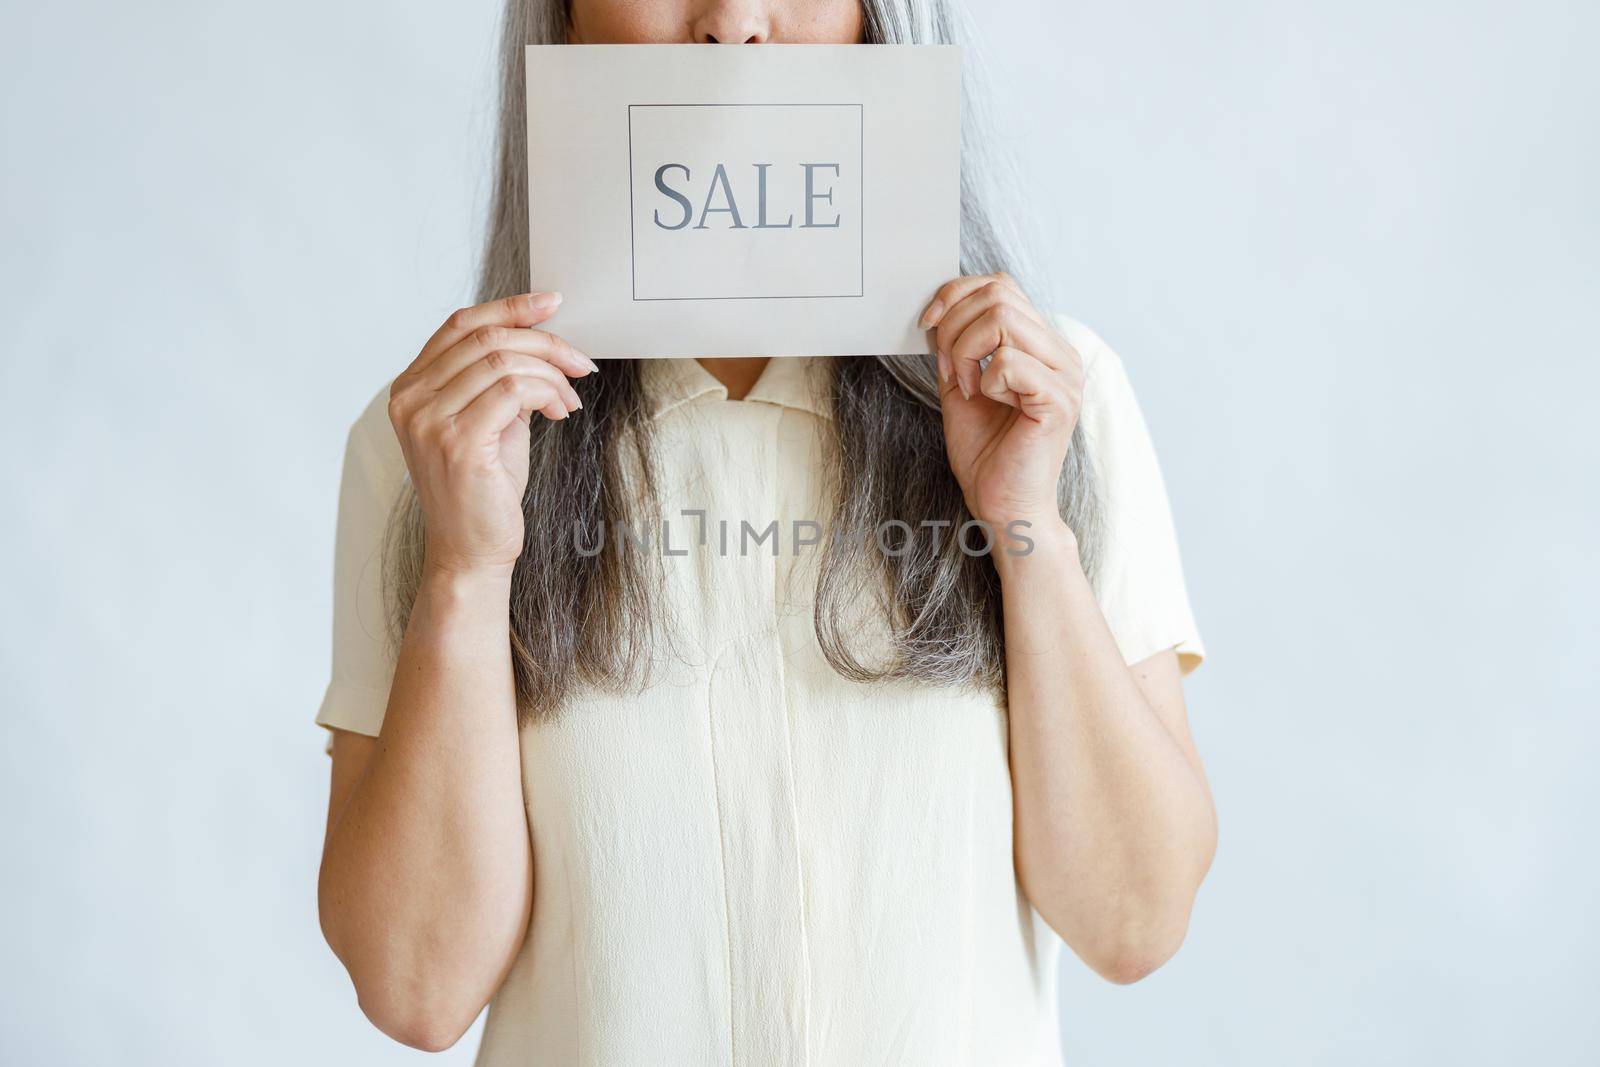 Mature woman with long grey hair holds Sale sign near face standing on light background in studio closeup